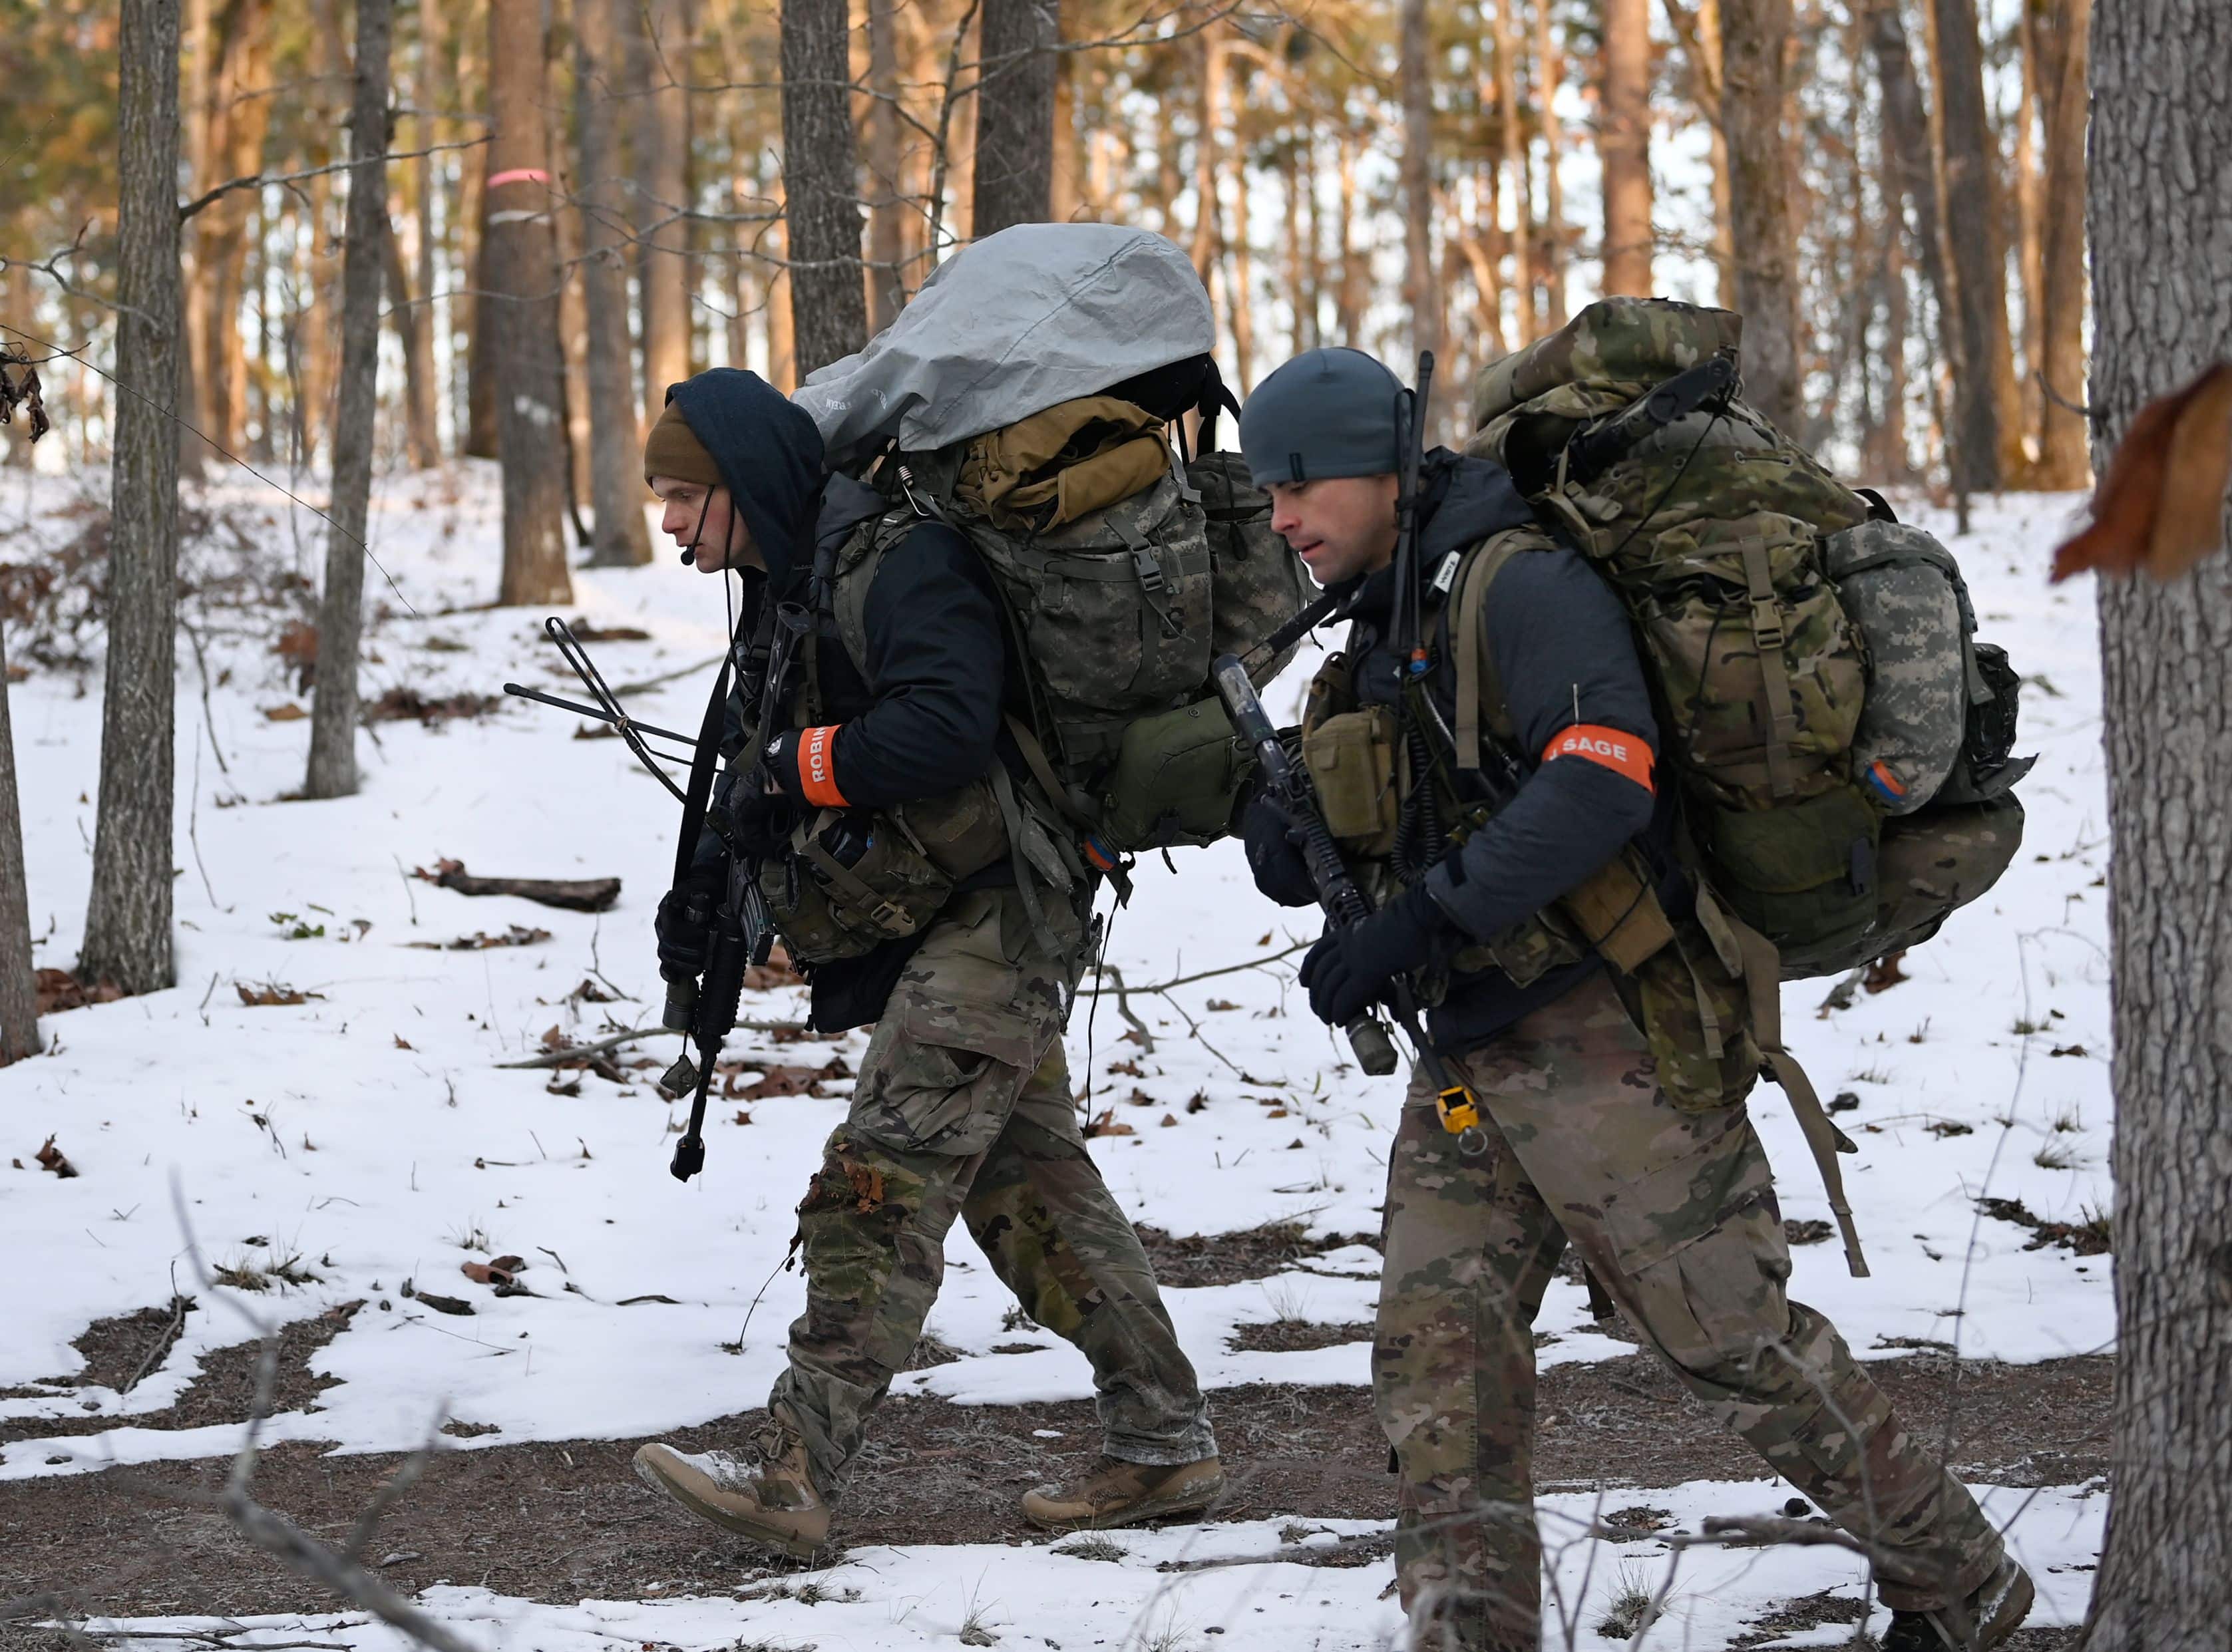 Special Forces candidates assigned to the U.S. Army John F. Kennedy Special Warfare Center and School hike through a wooded area during the final phase of field training known as Robin Sage in central North Carolina, January 23, 2022. Robin Sage is the culmination exercise for Soldiers in the Special Forces Qualification Course and has been the litmus test for Soldiers striving to earn the Green Beret for more than 50 years. (U.S. Army photo by K. Kassens)